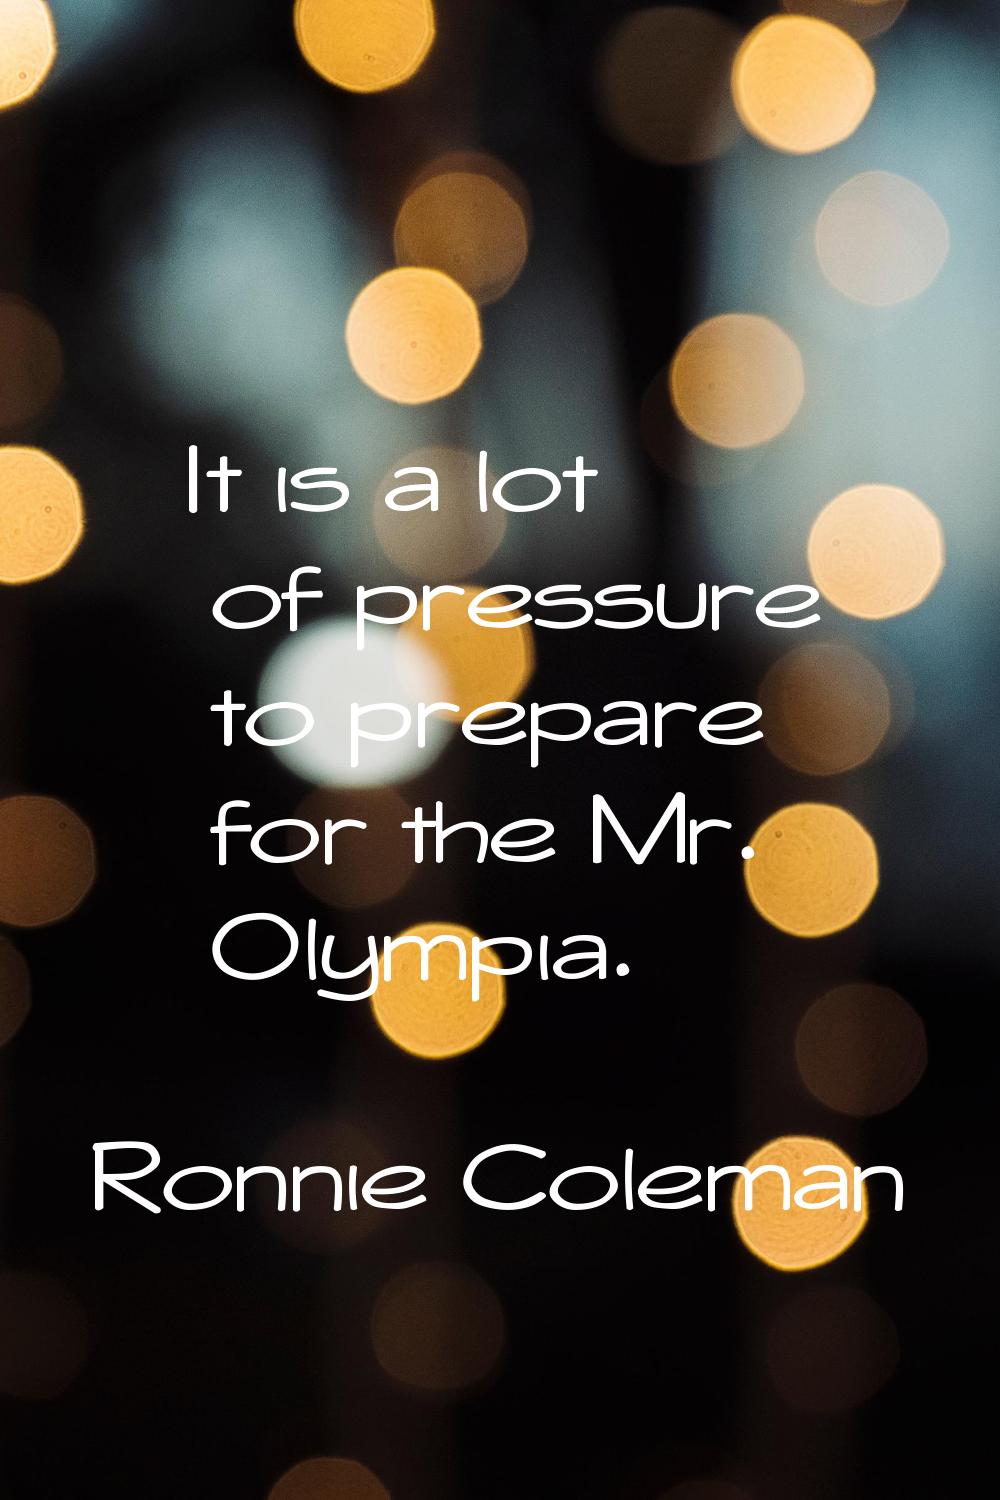 It is a lot of pressure to prepare for the Mr. Olympia.